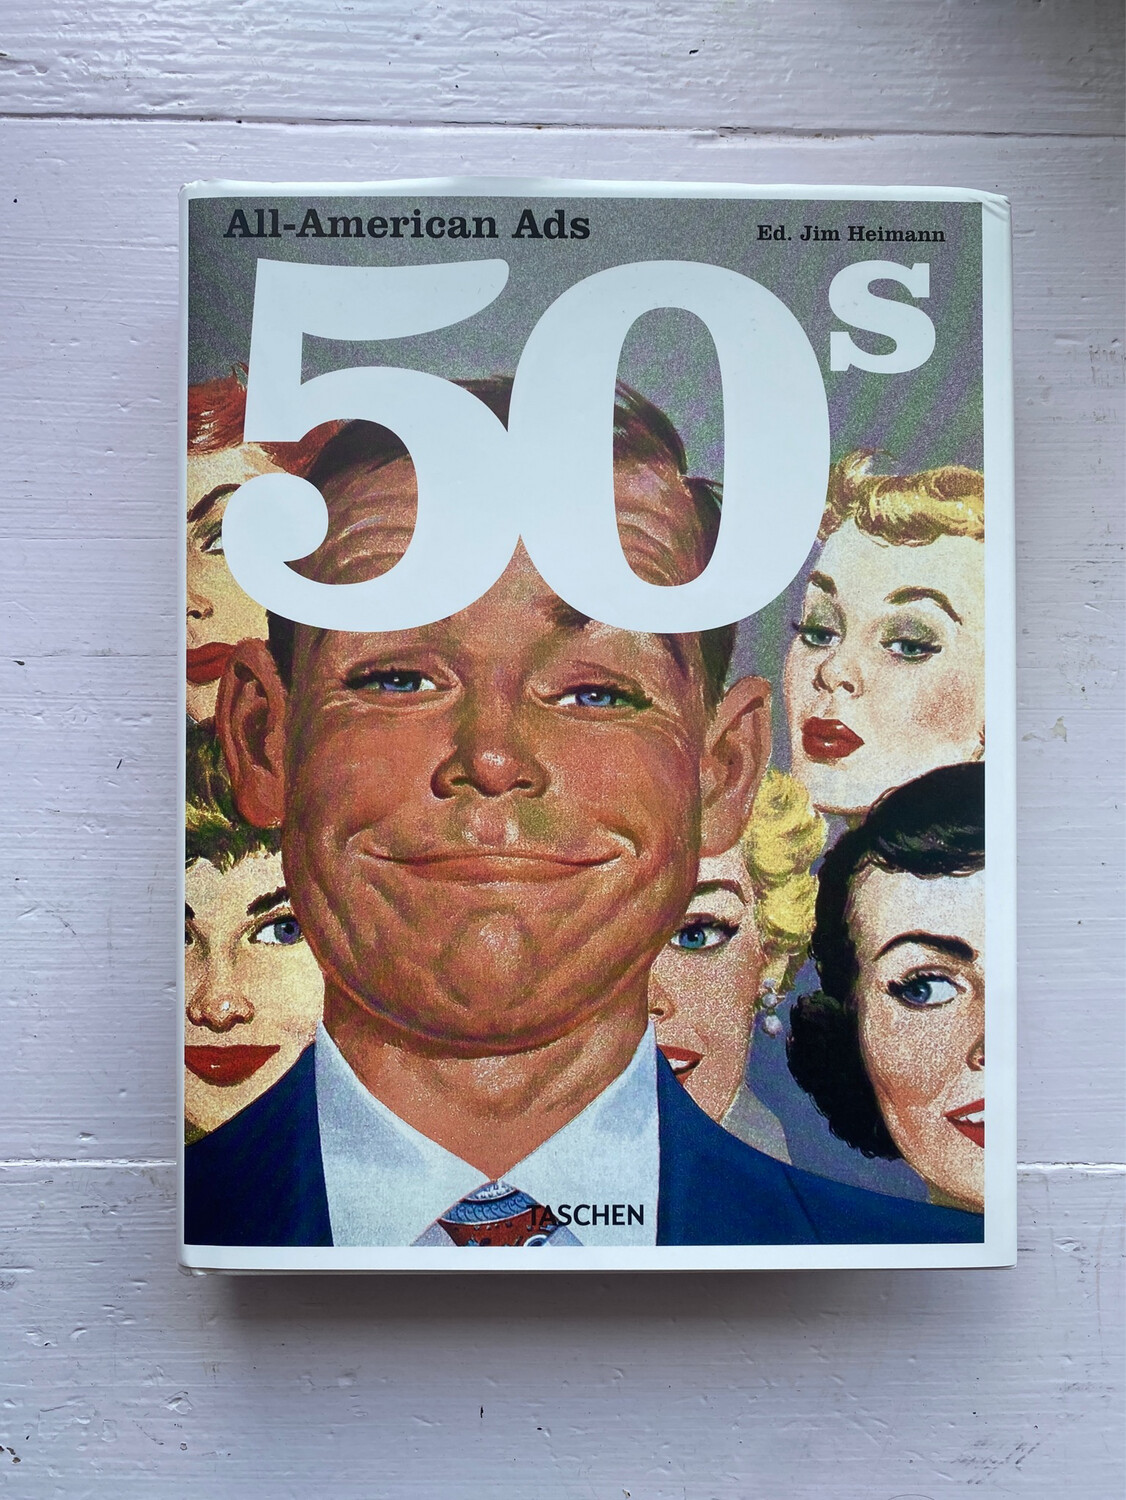 All-American Ads of the 50s